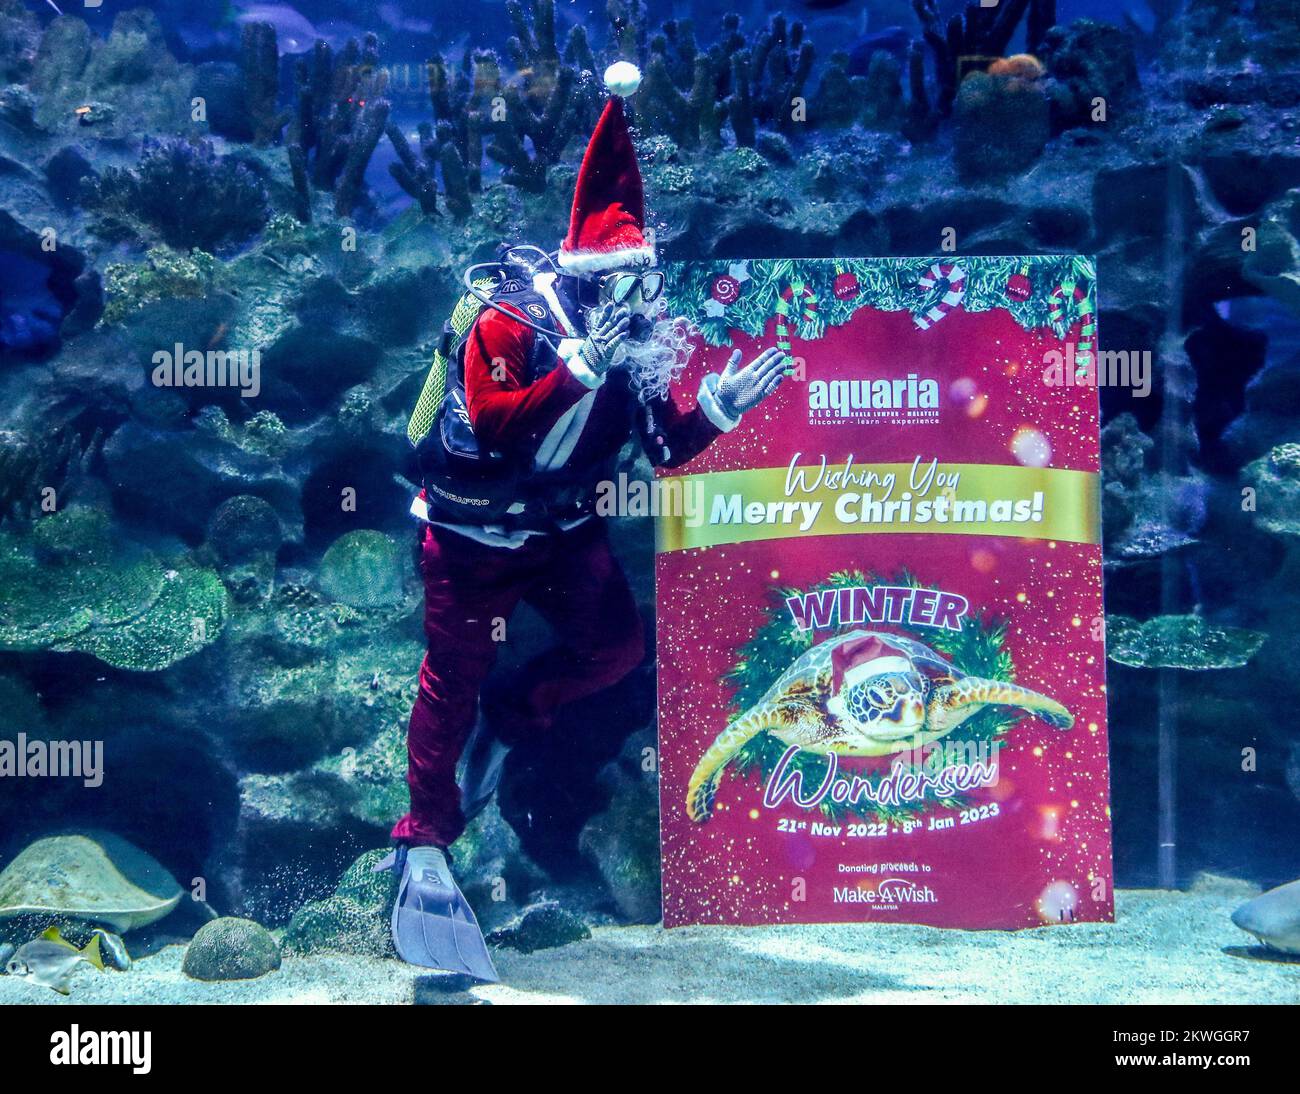 Kuala Lumpur, Malaysia. 30th Nov, 2022. A diver dressed as Santa Claus performs in a fish tank during a Make-A-Wish charity event at the Aquaria KLCC. The joint event between Aquaria KLCC and the Make-A-Wish organization of Malaysia, is to help the children's wishes and dreams be fulfilled! Credit: SOPA Images Limited/Alamy Live News Stock Photo